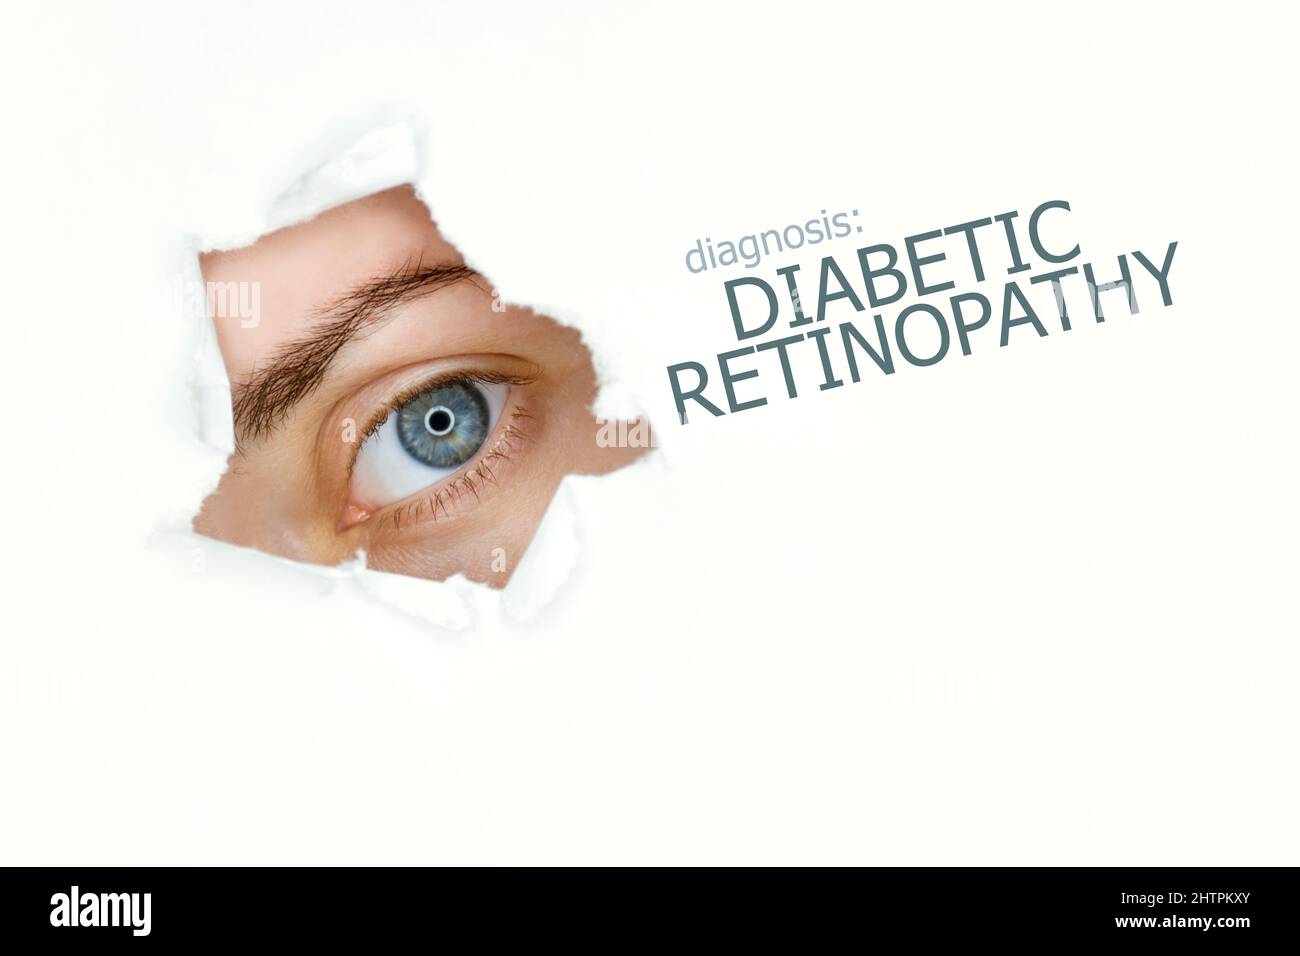 Diabetic retinopathy disease poster with eye test chart and blue eye.Isolated on white Stock Photo